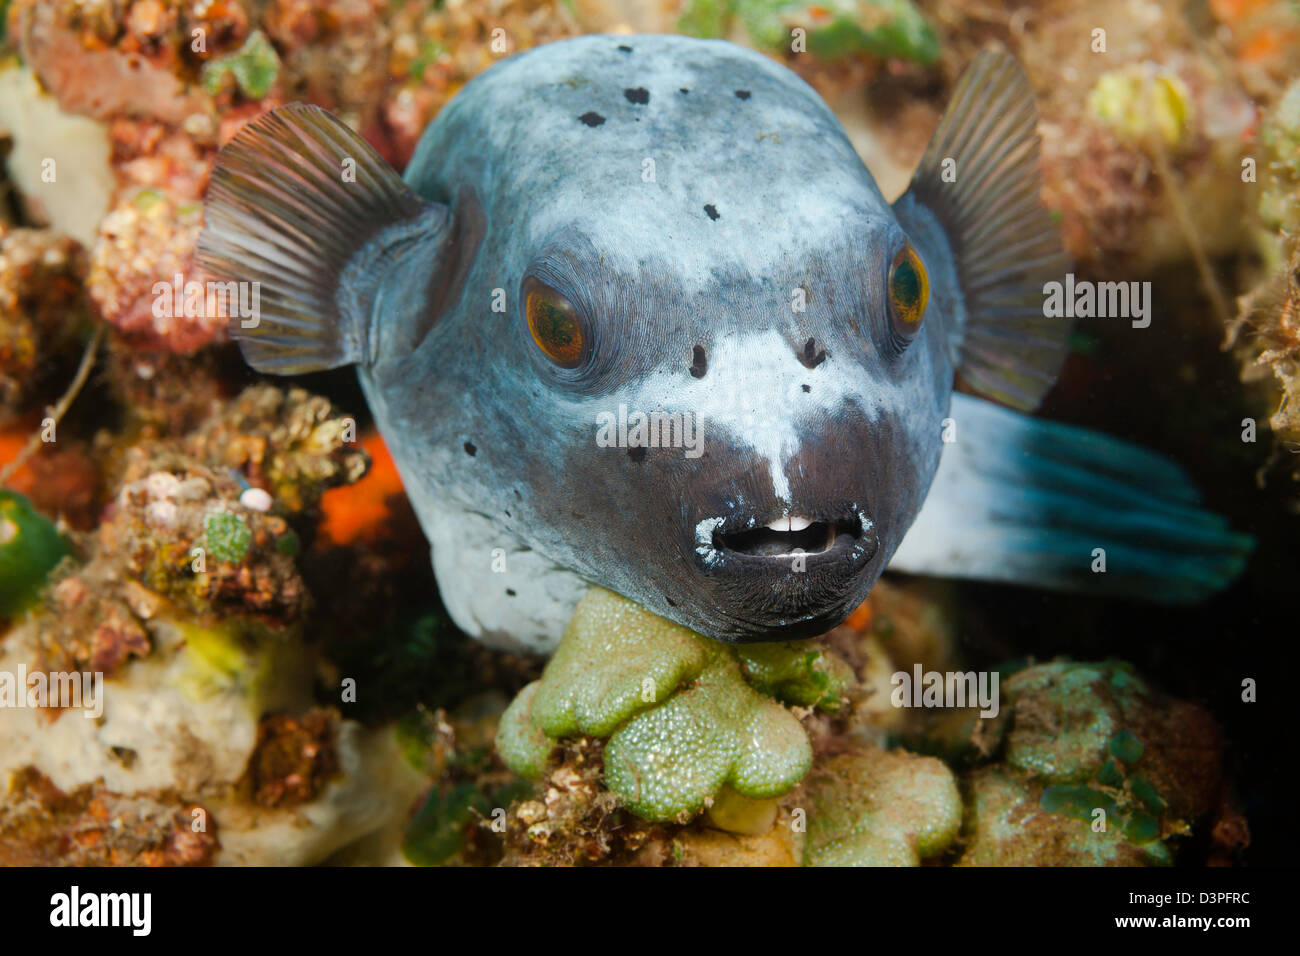 This black spotted puffer, Arothron nigropunctatus, is resting on a reef off the island of Bali, Indonesia. Stock Photo